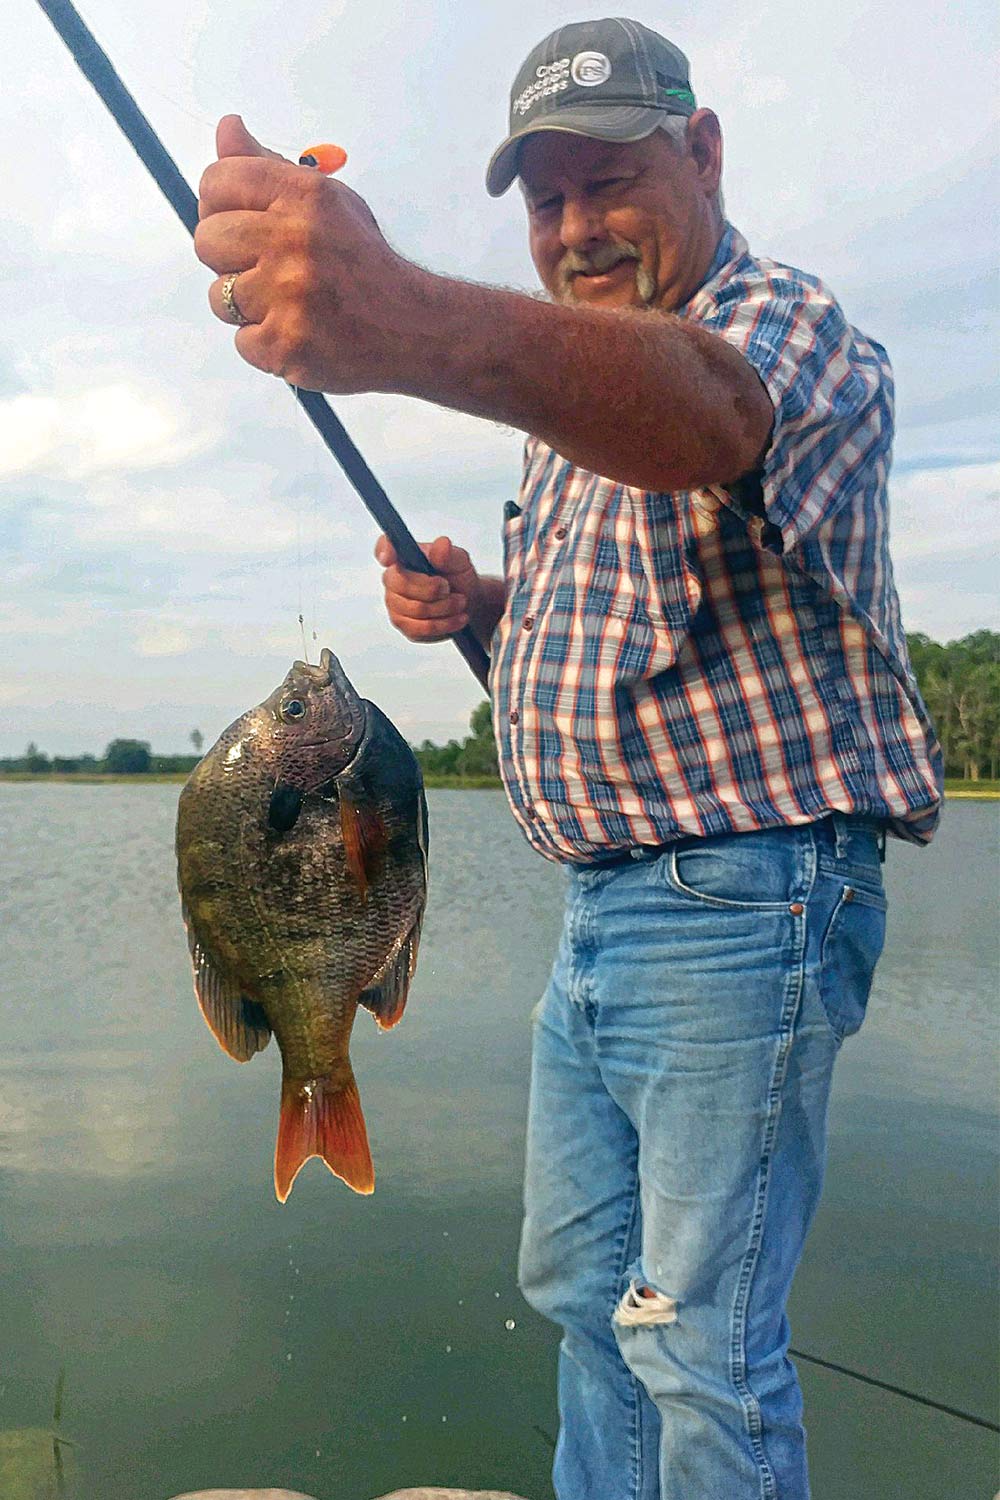 Fishing with Live Crickets for Bluegill, Panfish, Bream- How to Hook 